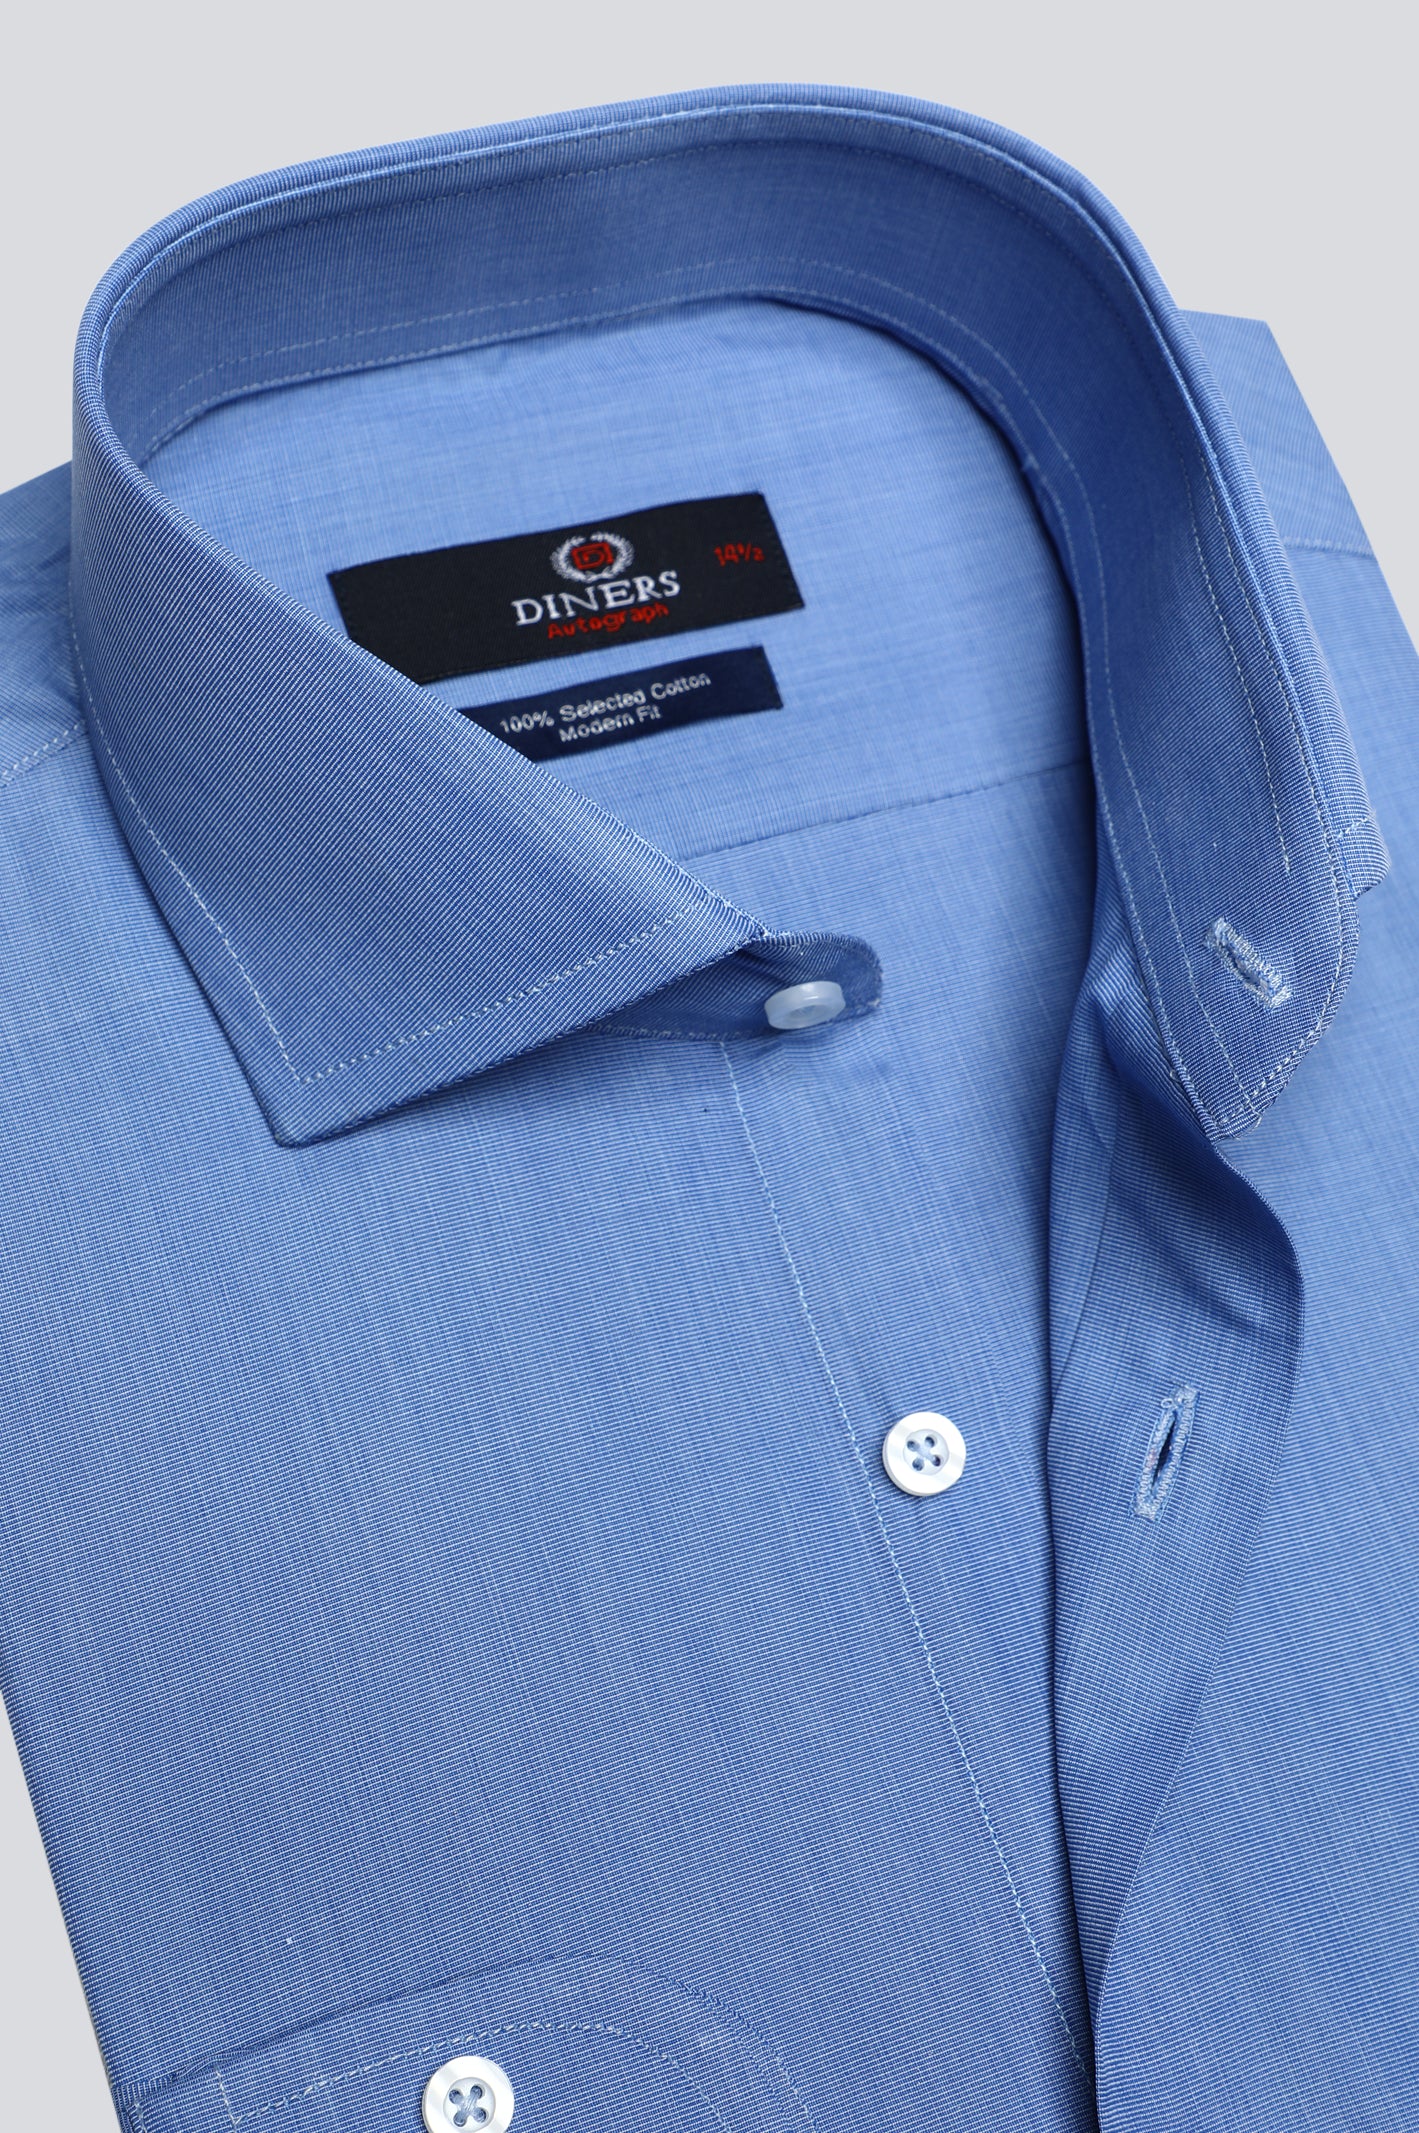 Blue Textured Formal Autograph Shirt From Diners